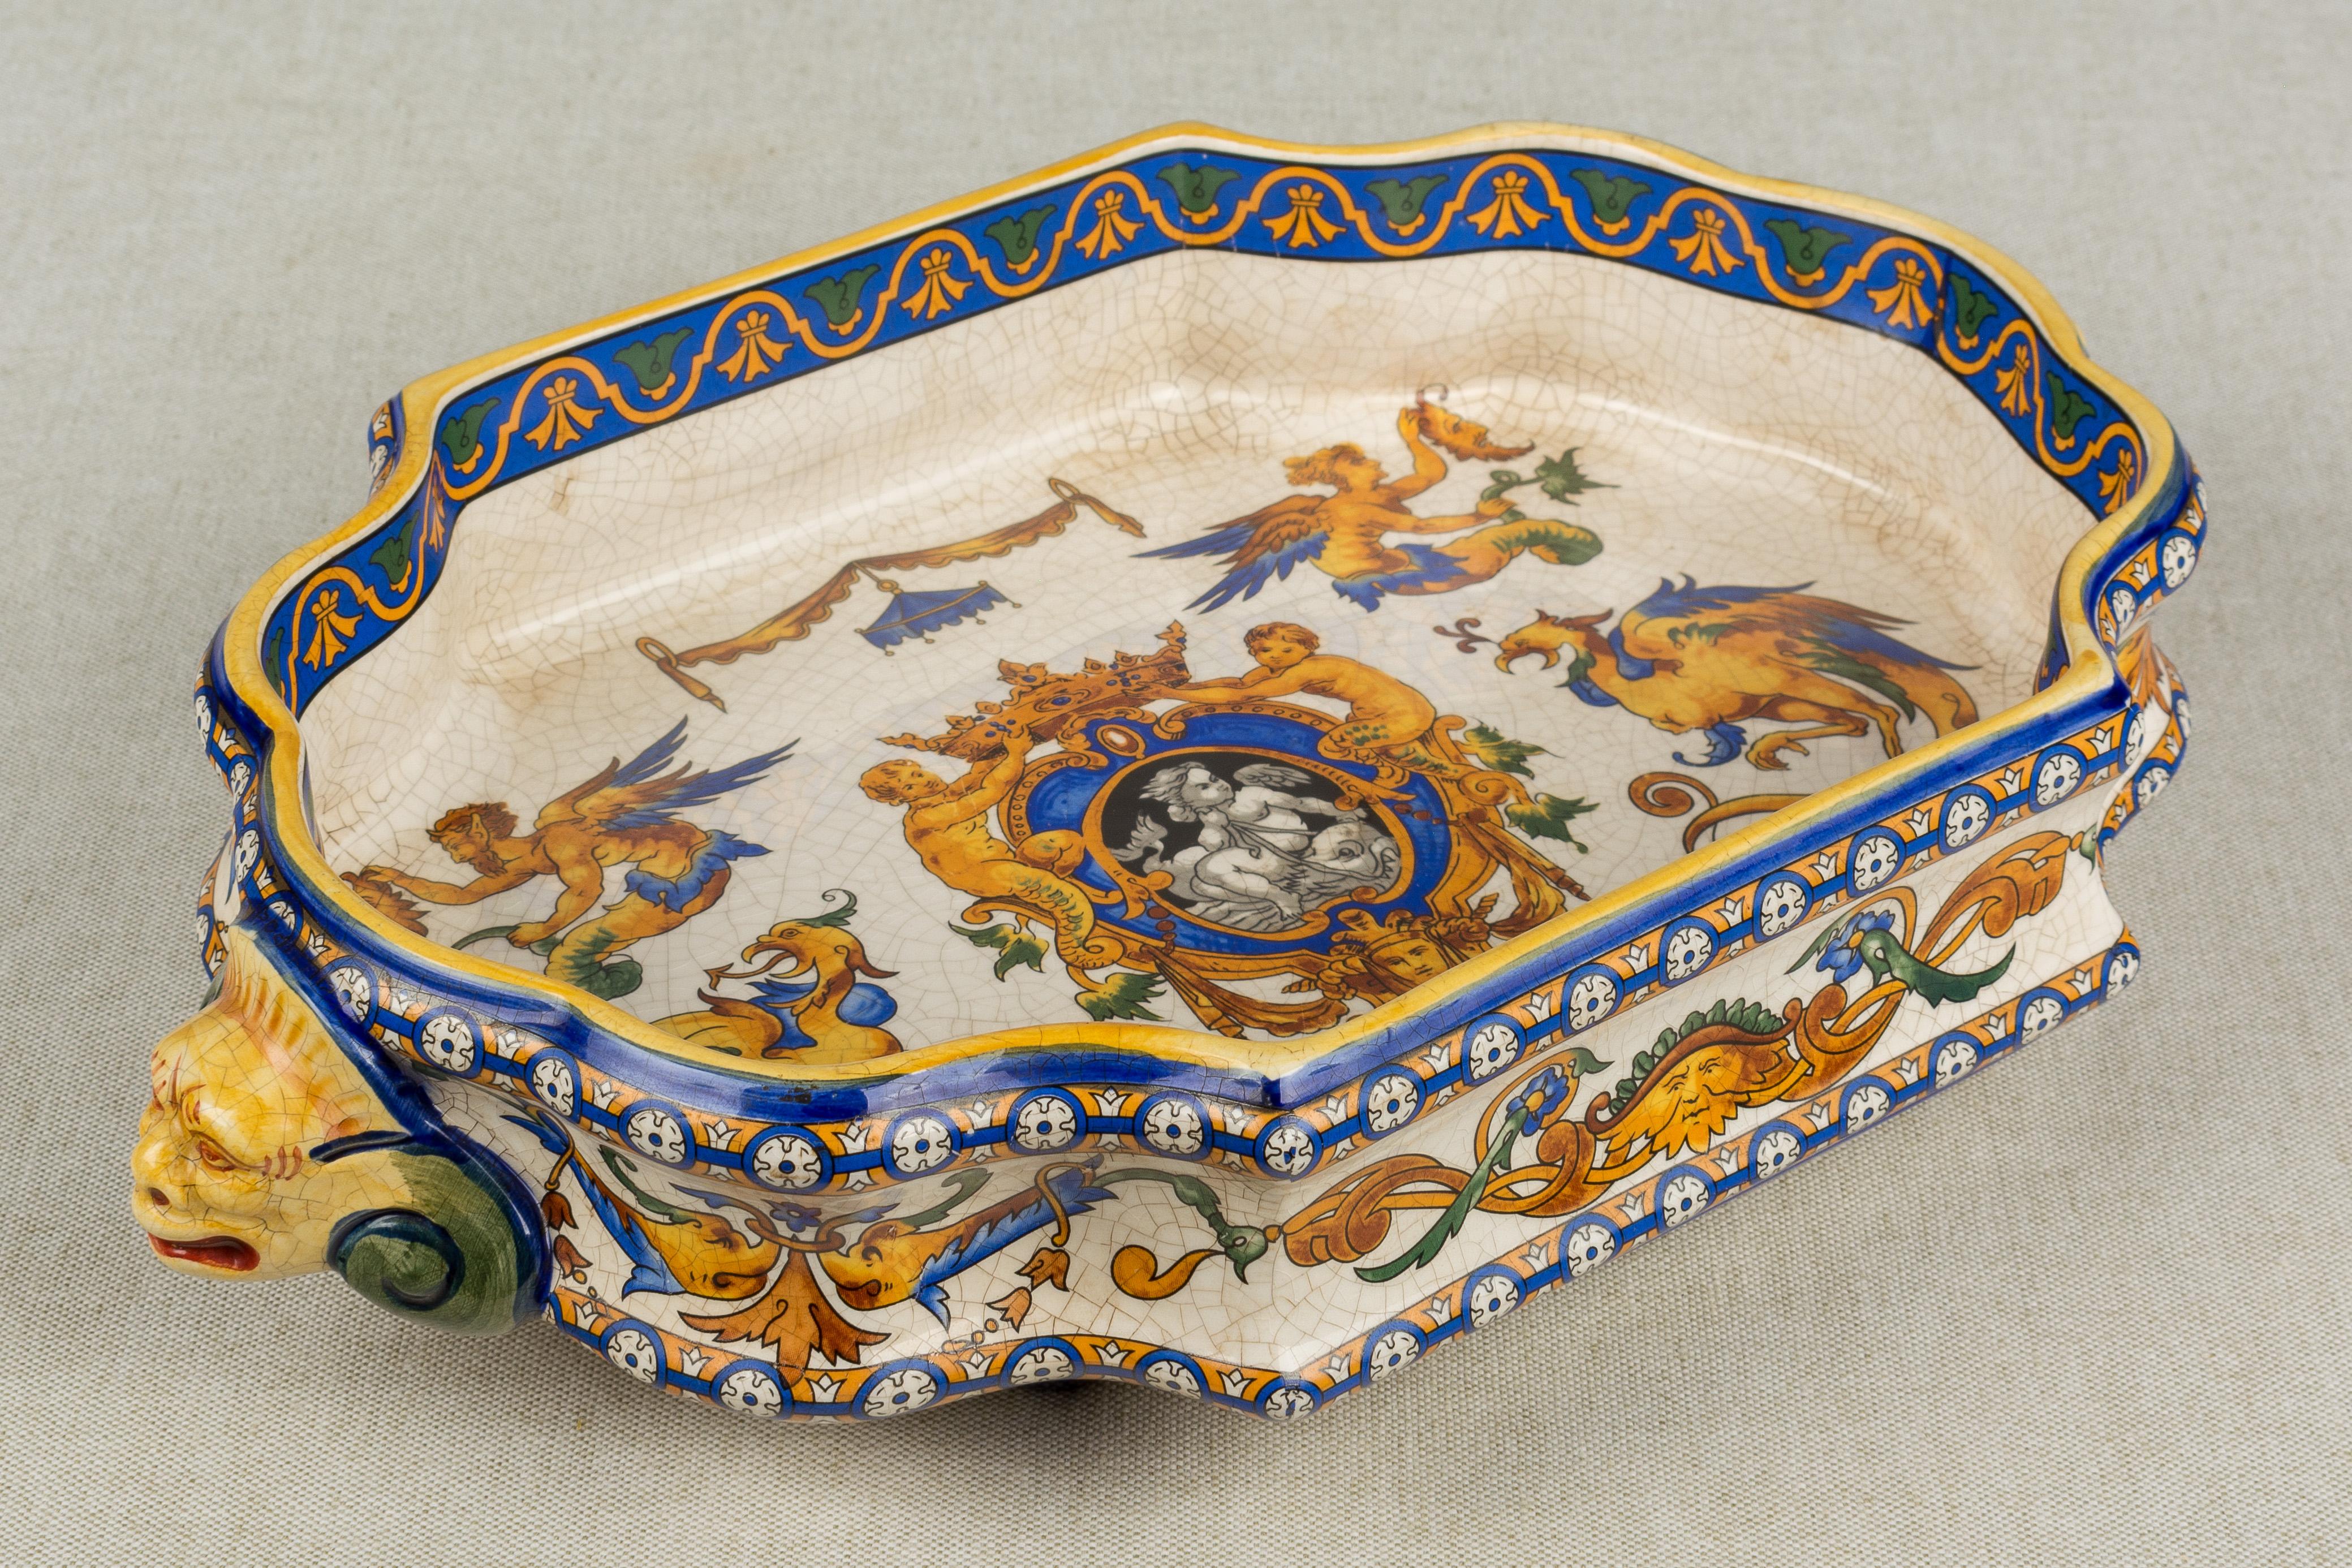 French Provincial 19th Century French Gien Faience Jardinière